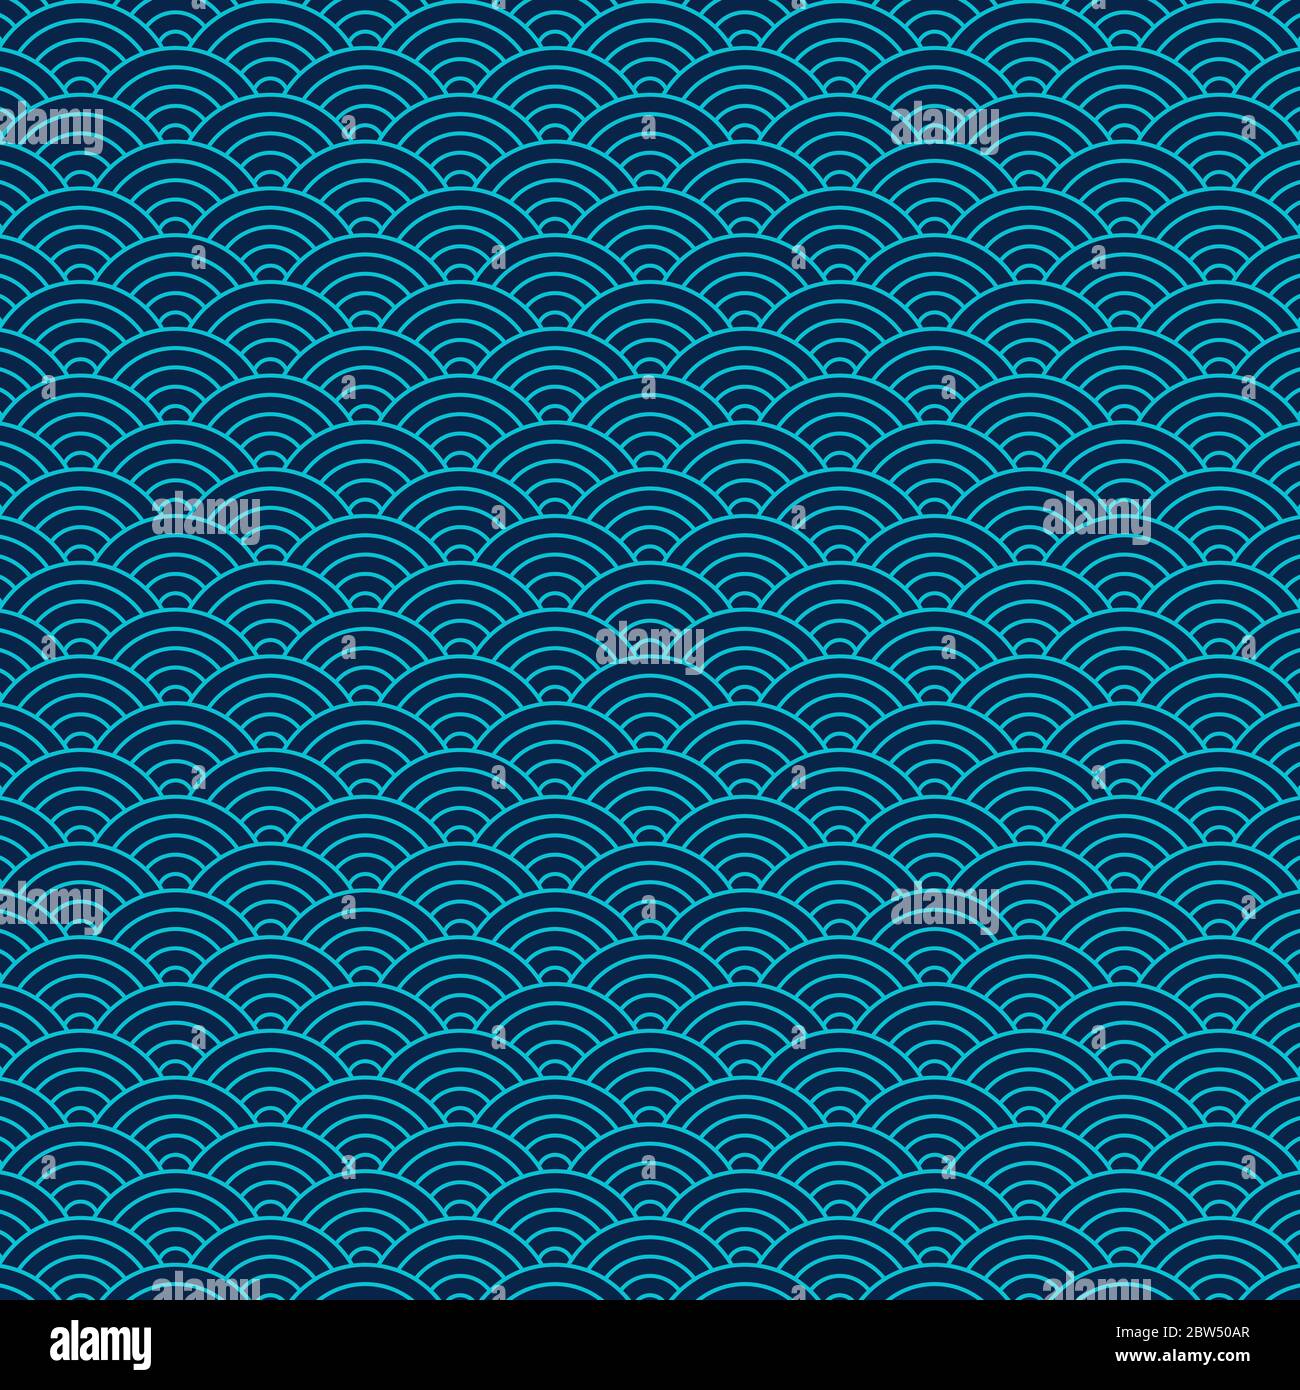 Wave crest pattern inspired by traditional Japanese geometrical patterns. Abstract vector design. Blue Seigaiha pattern. Stock Vector